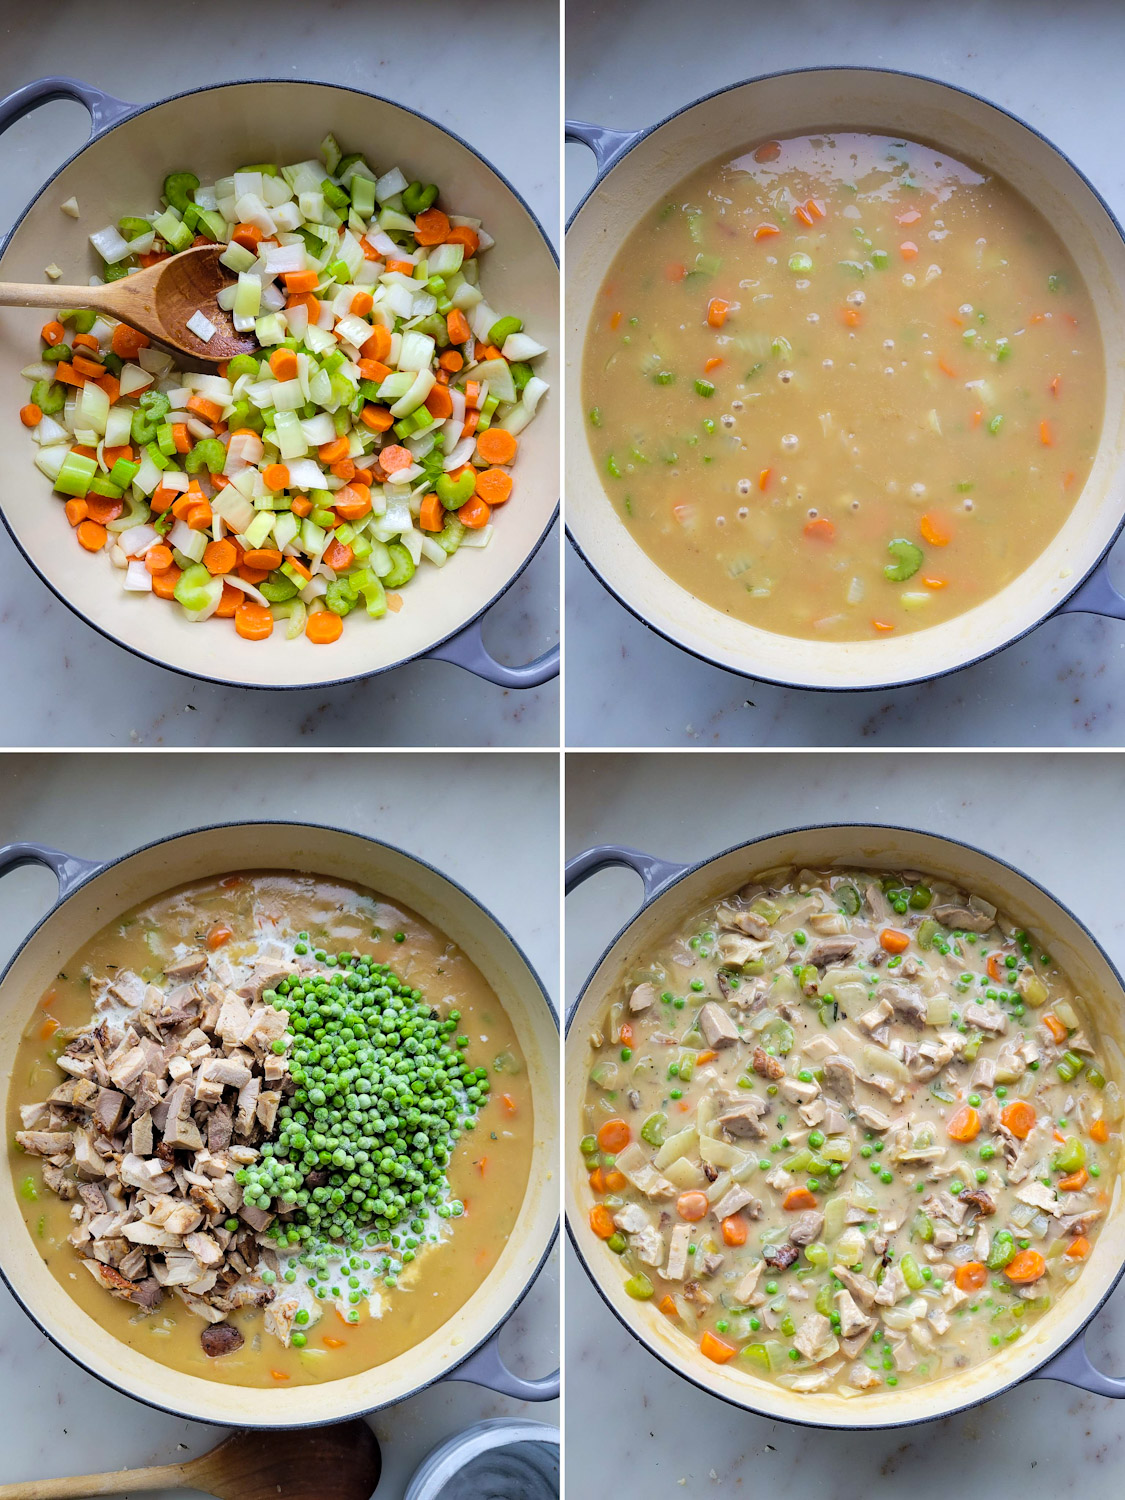 Collage showing the making of the Sage And Cider Turkey Pot Pie filling.